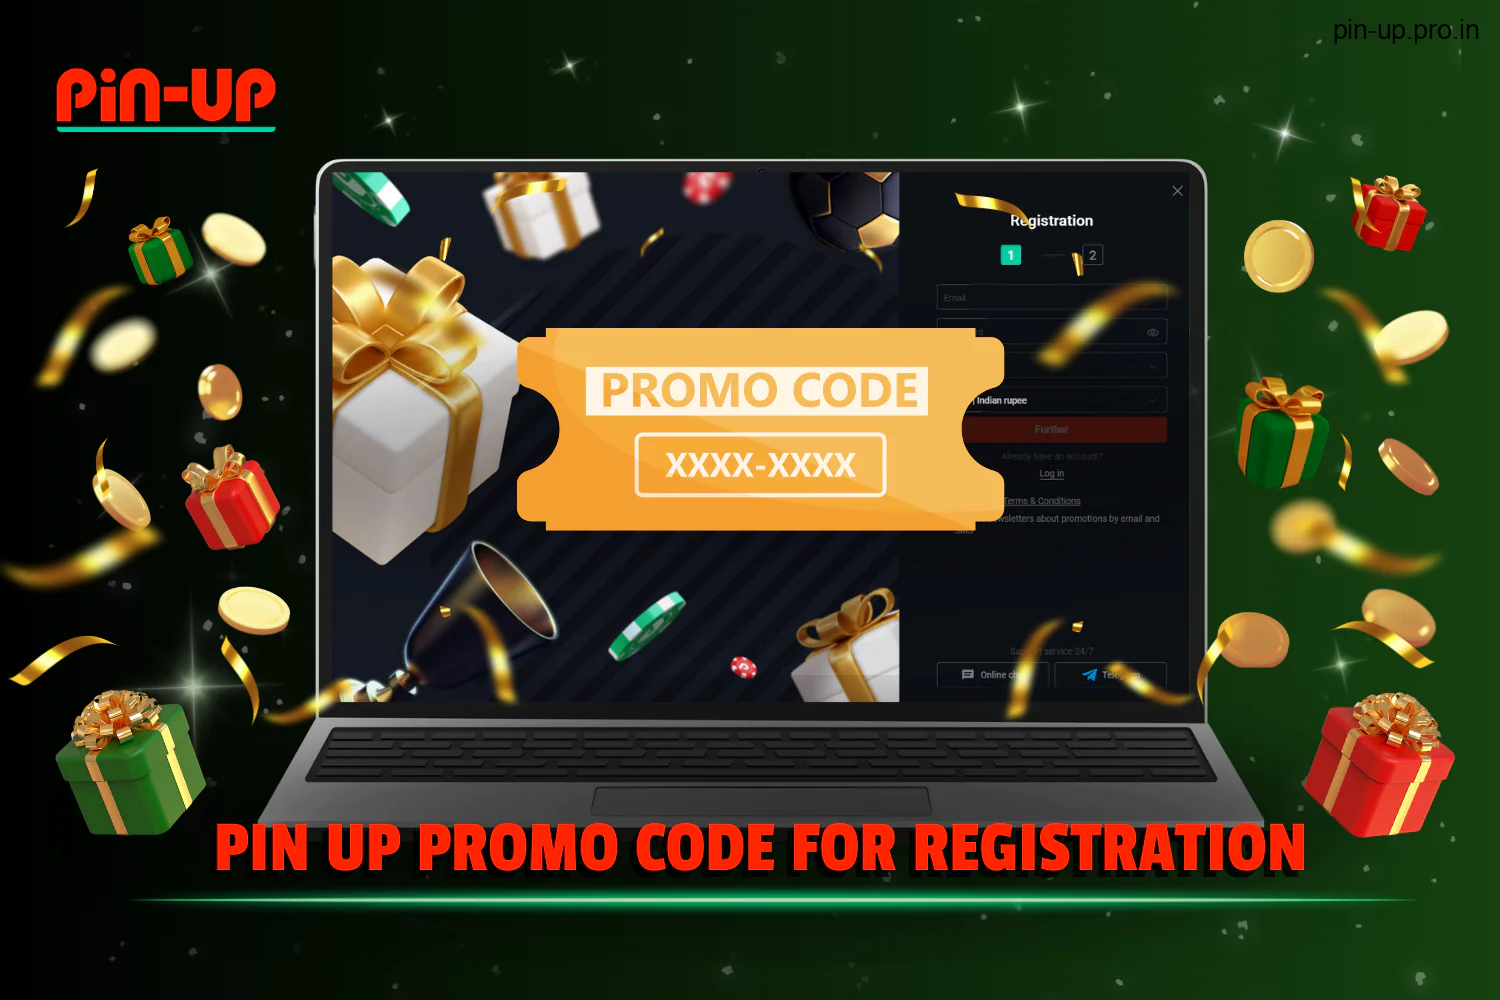 Indian users can avail a special promo code Pin Up during registration to receive an additional bonus